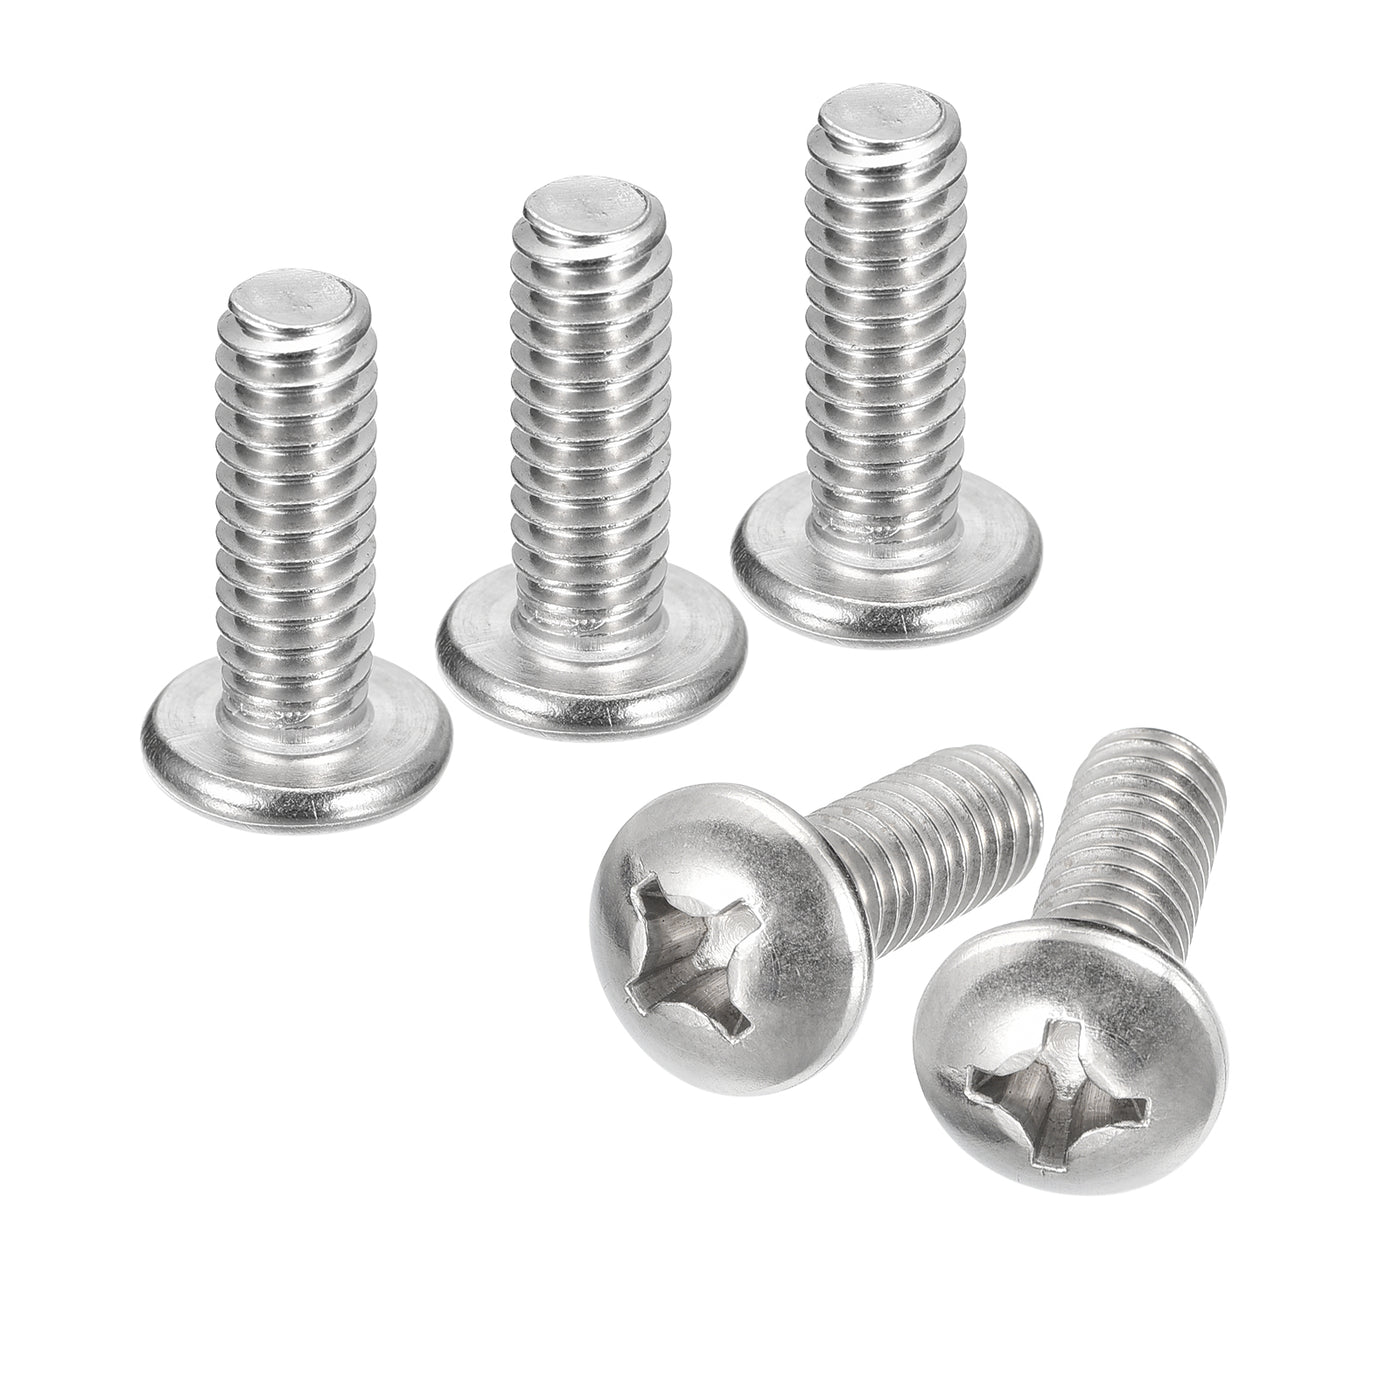 uxcell Uxcell 1/4-20x3/4" Pan Head Machine Screws, Stainless Steel 18-8 Screw, Pack of 50